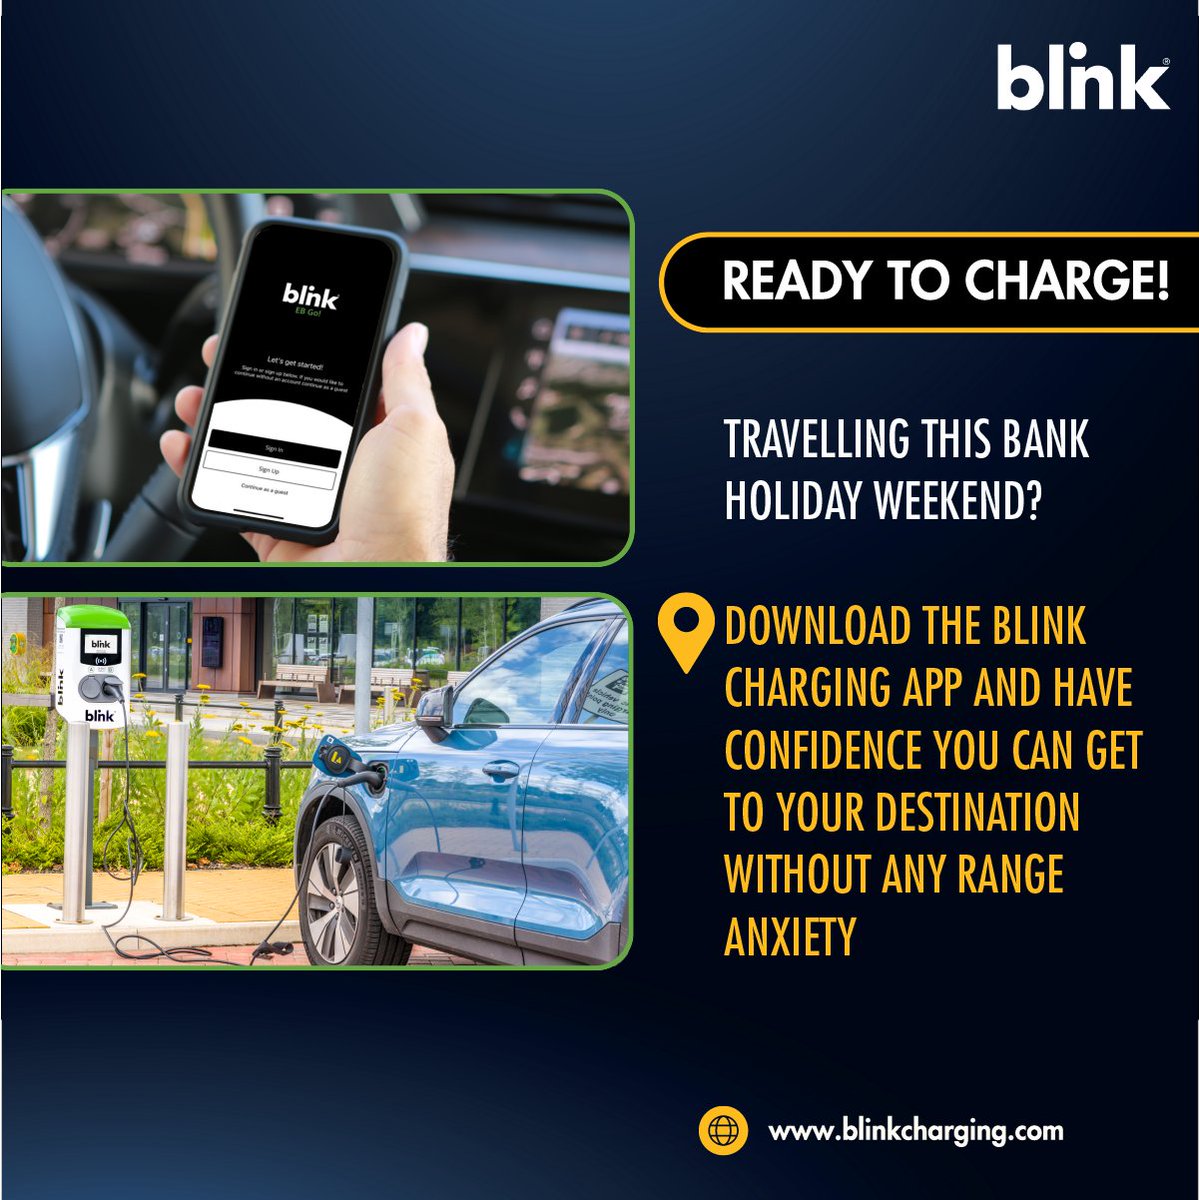 Travelling this Bank Holiday Weekend, get rid of the range anxiety and become range confident download the Blink Charging app today. #ChargeontheGo #Blink #Bankholiday #EVRangeConfidence ow.ly/AY4a50RoWqi